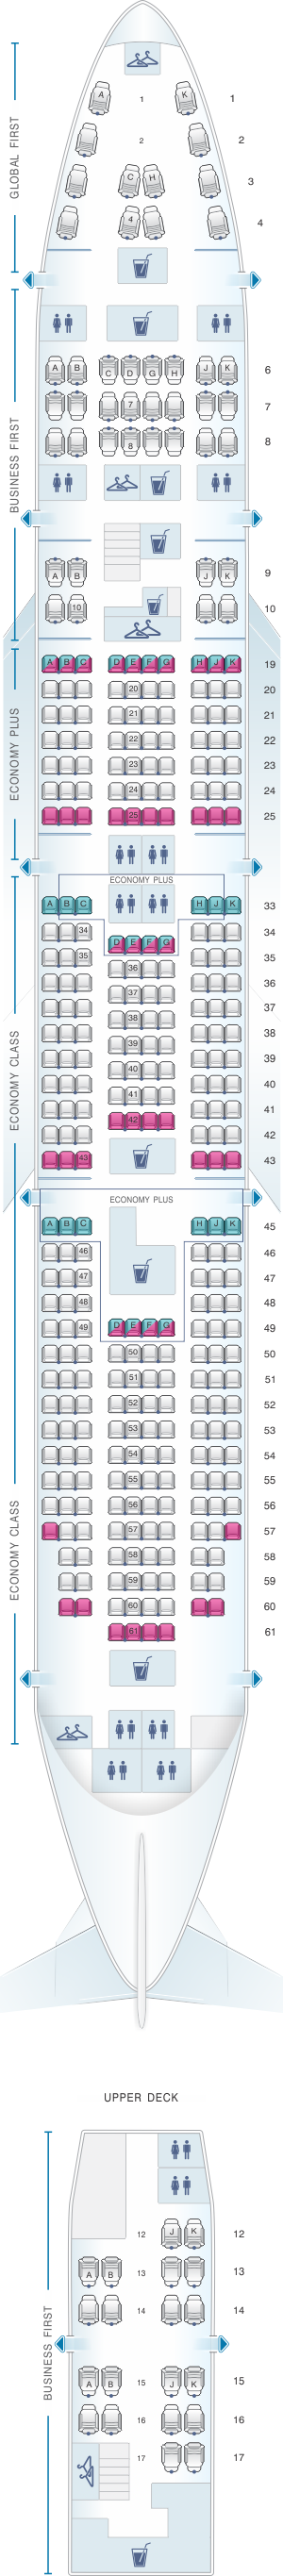 Seat map for United Airlines Boeing B747 400